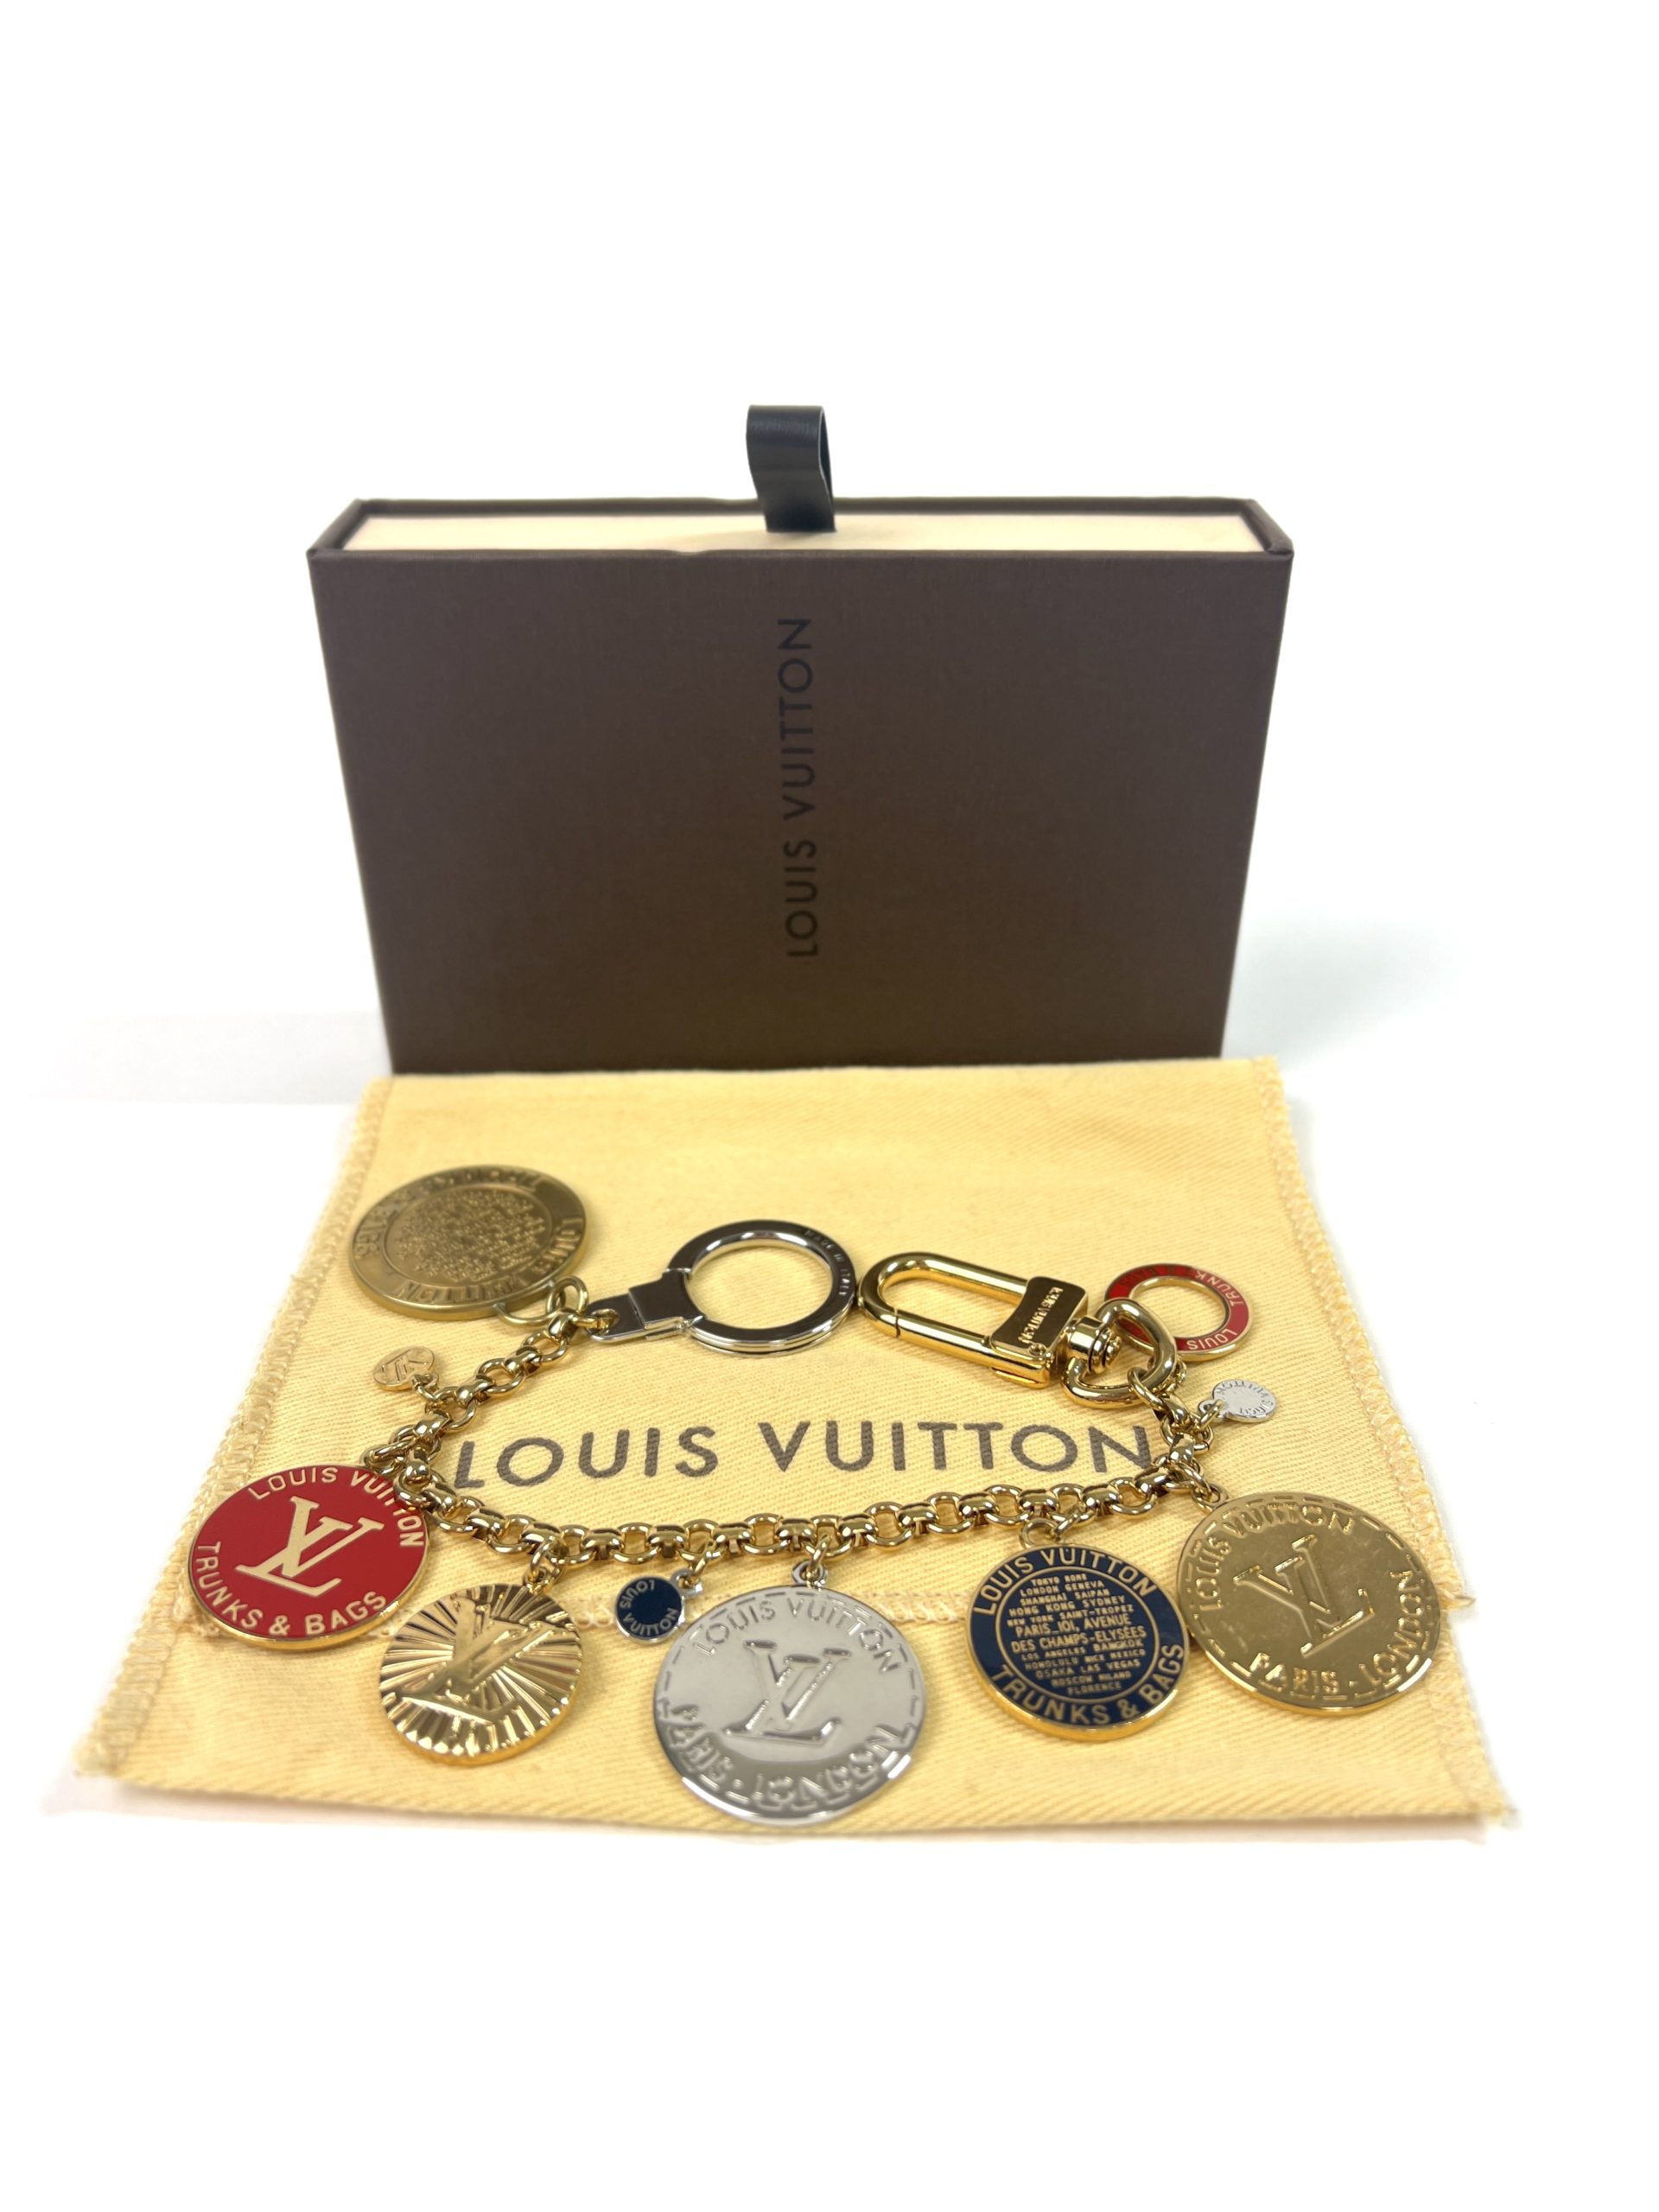 Louis Vuitton Trunks and Bags Multicolor Chain Bag Charm at